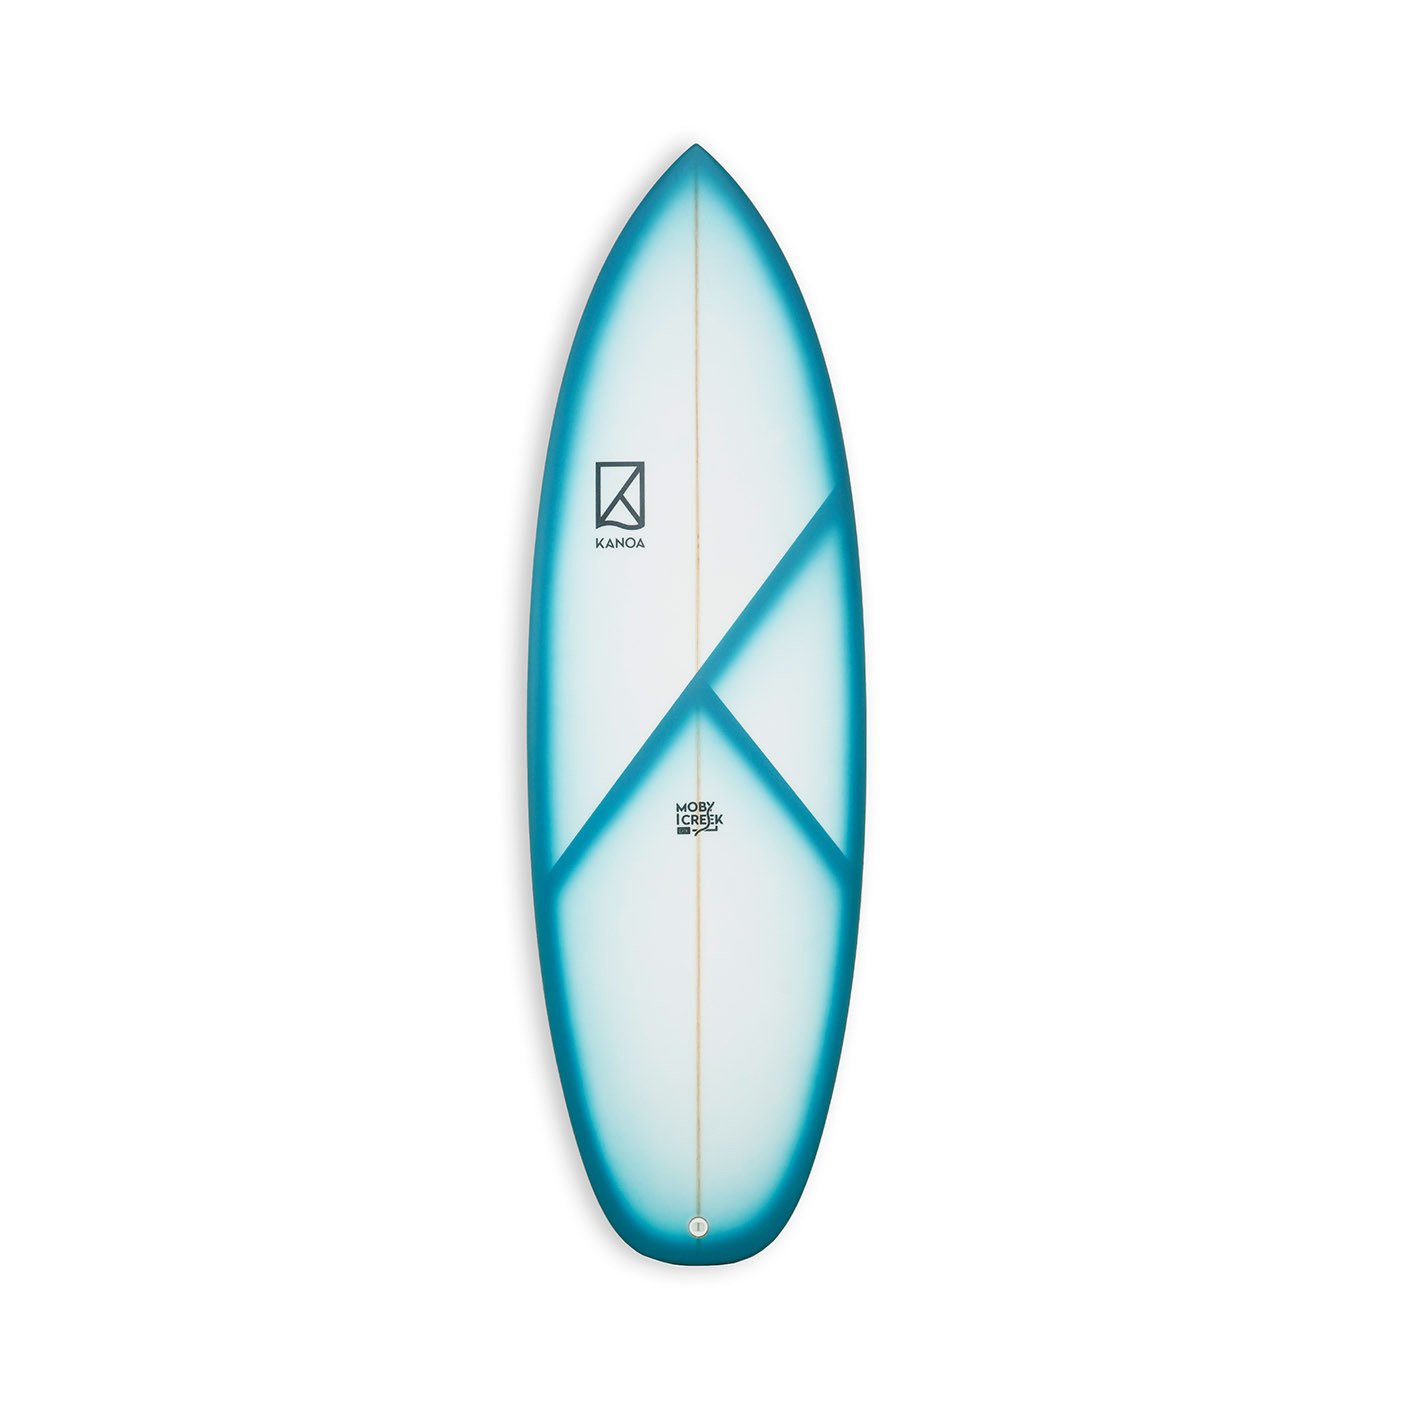 River Surfboard for heavier riders and weaker waves